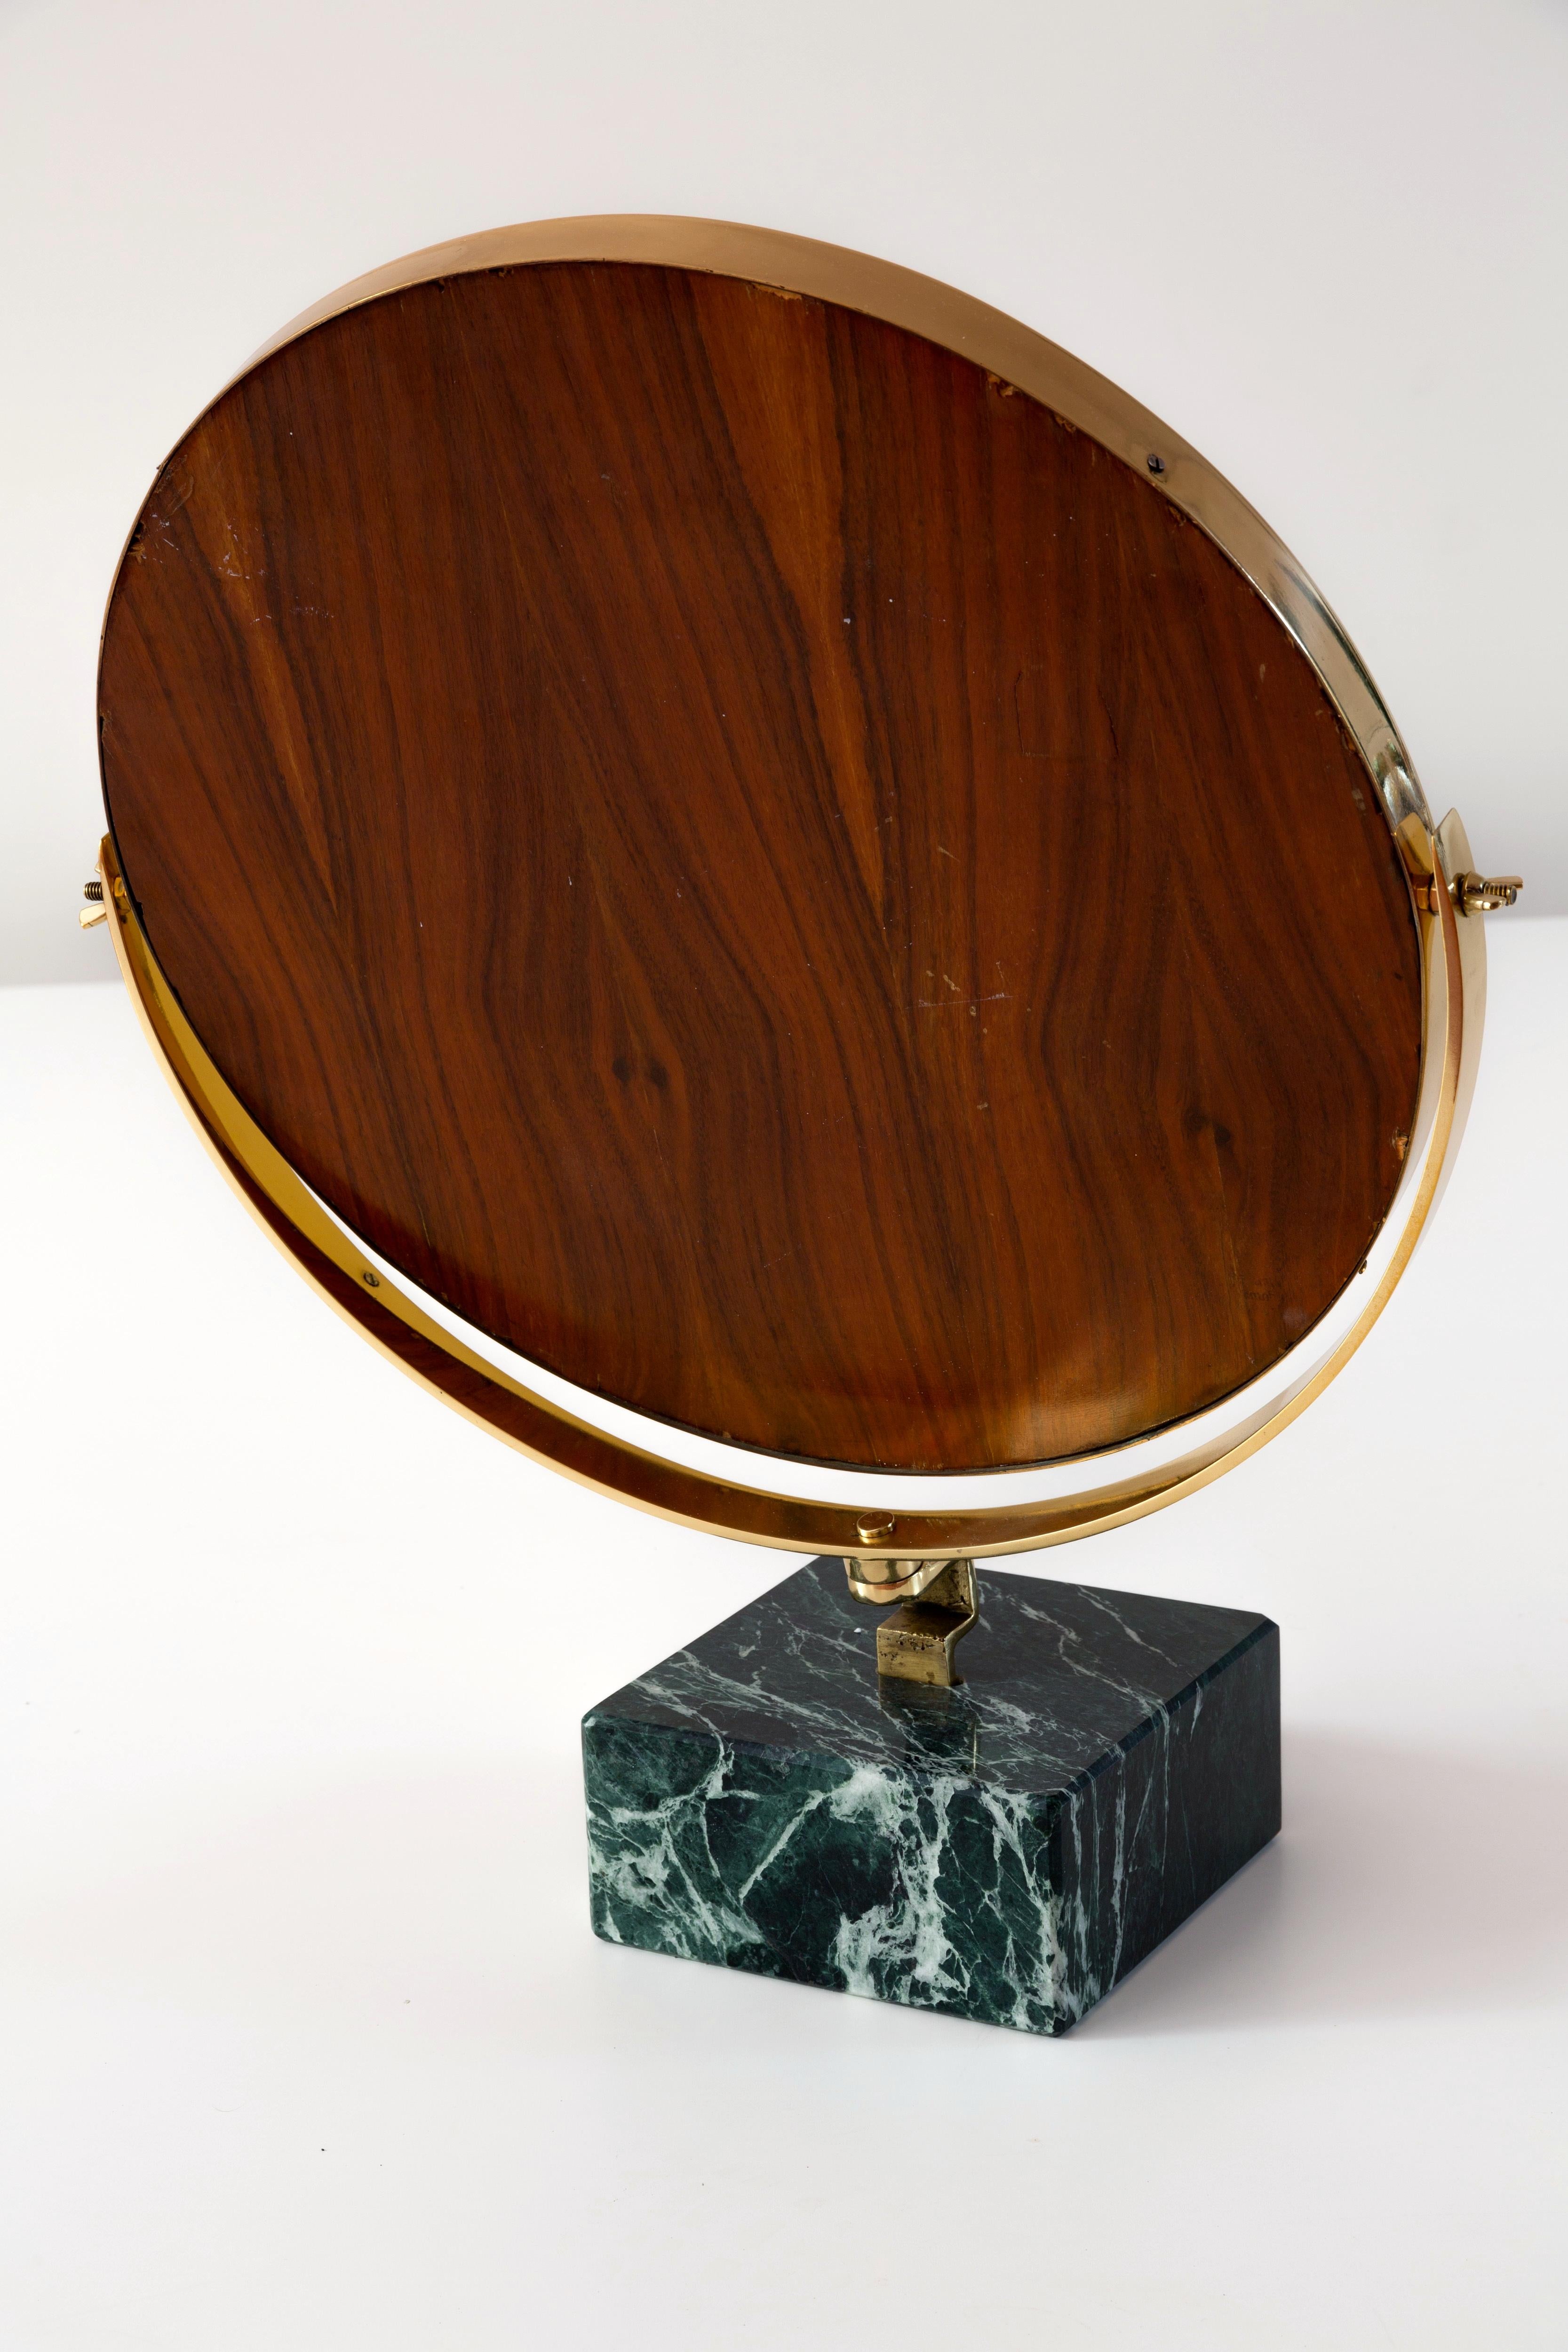 Vanity table mirror designed by Gio Ponti for the vanity of Hotel Royal, Napoli, 1955 and produced by Fontana Arte in 1955.

Original piece customized by CG with green marble support in 2016.

The Gio Ponti vanity was produced by Giordano Chiesa